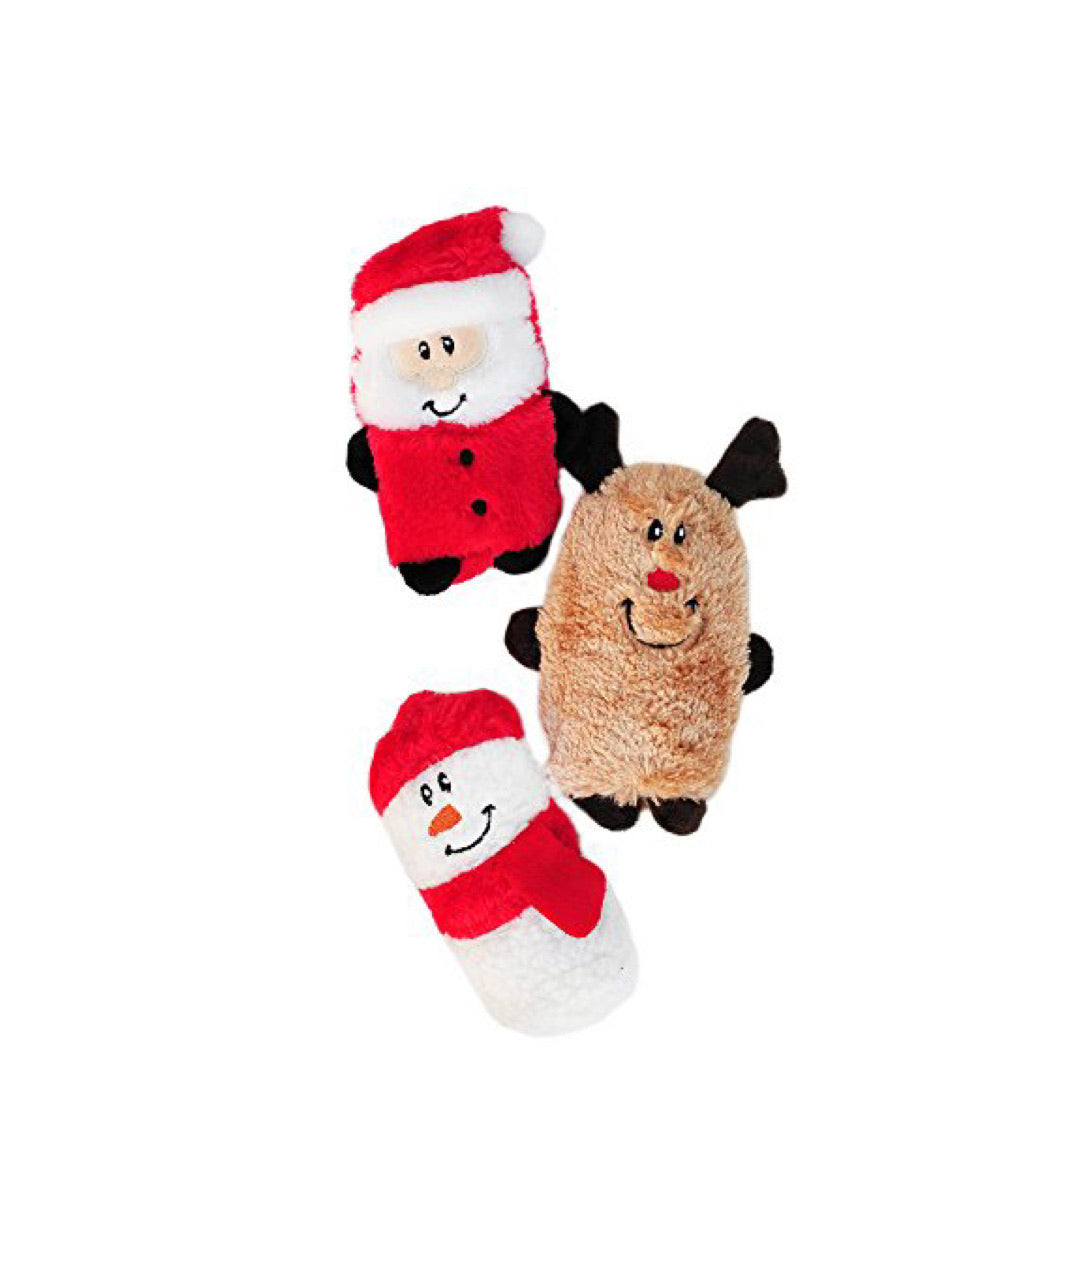 Zippypaws Holiday Squeakie Buddie 3-pack